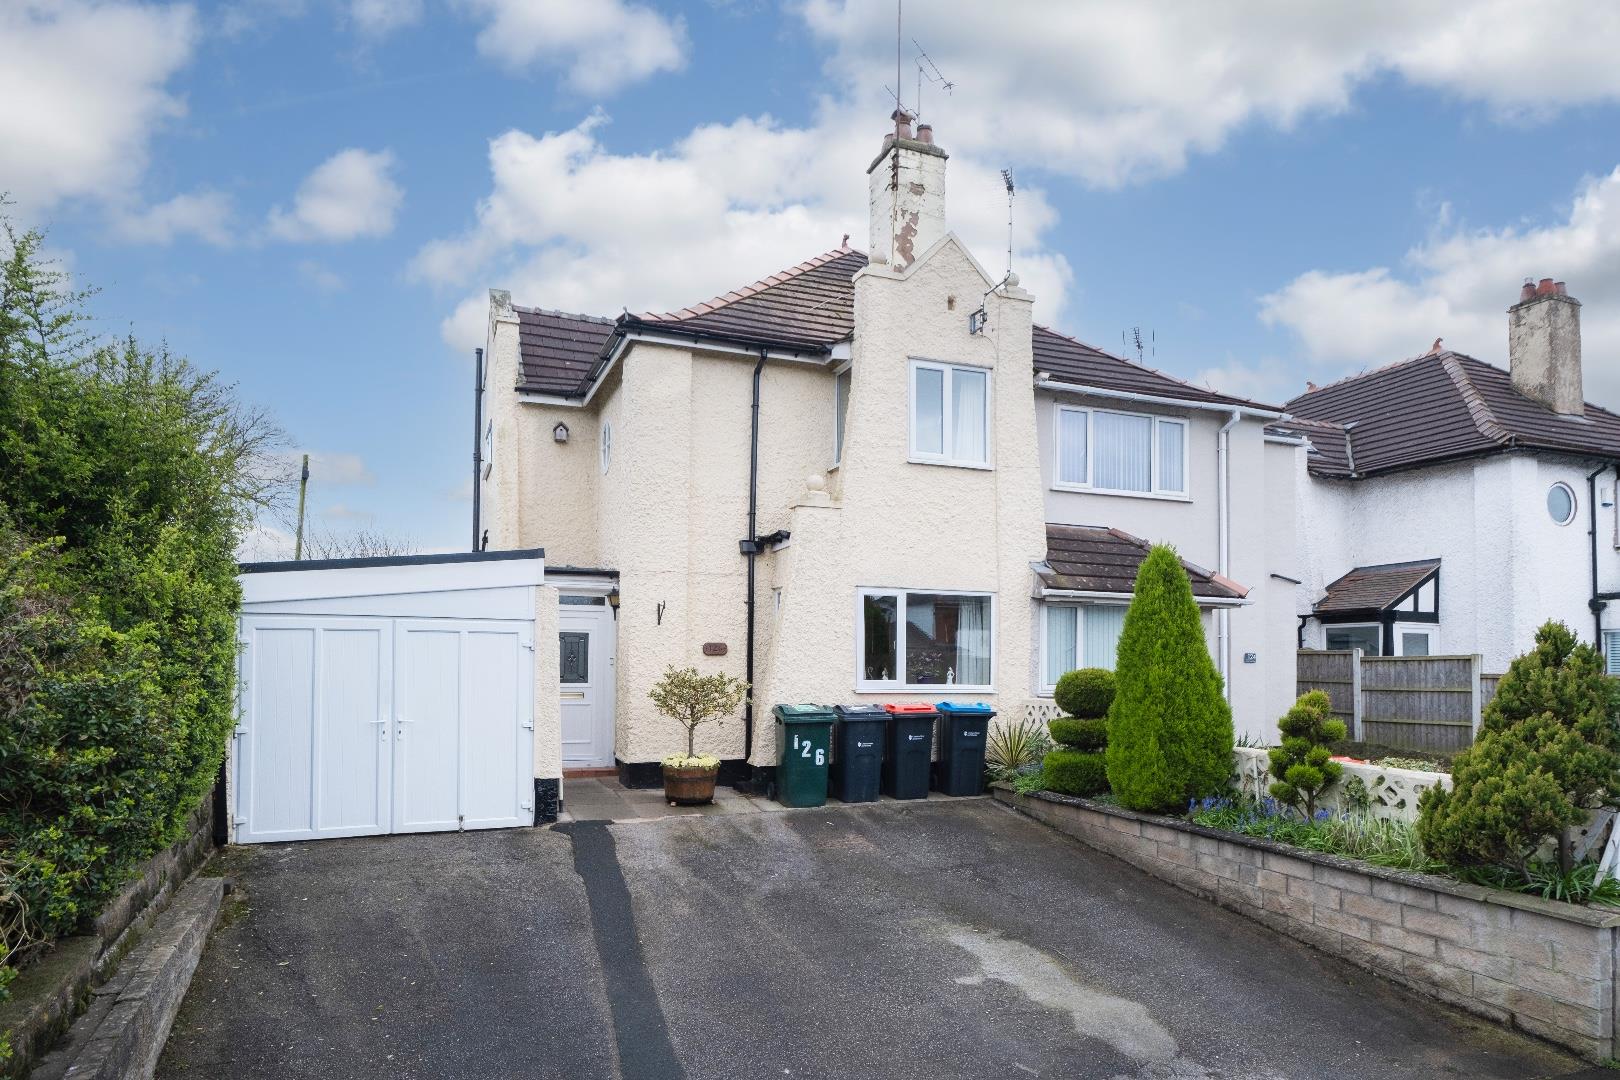 4 bedroom  Semi Detached House for Sale in Vicars Cross